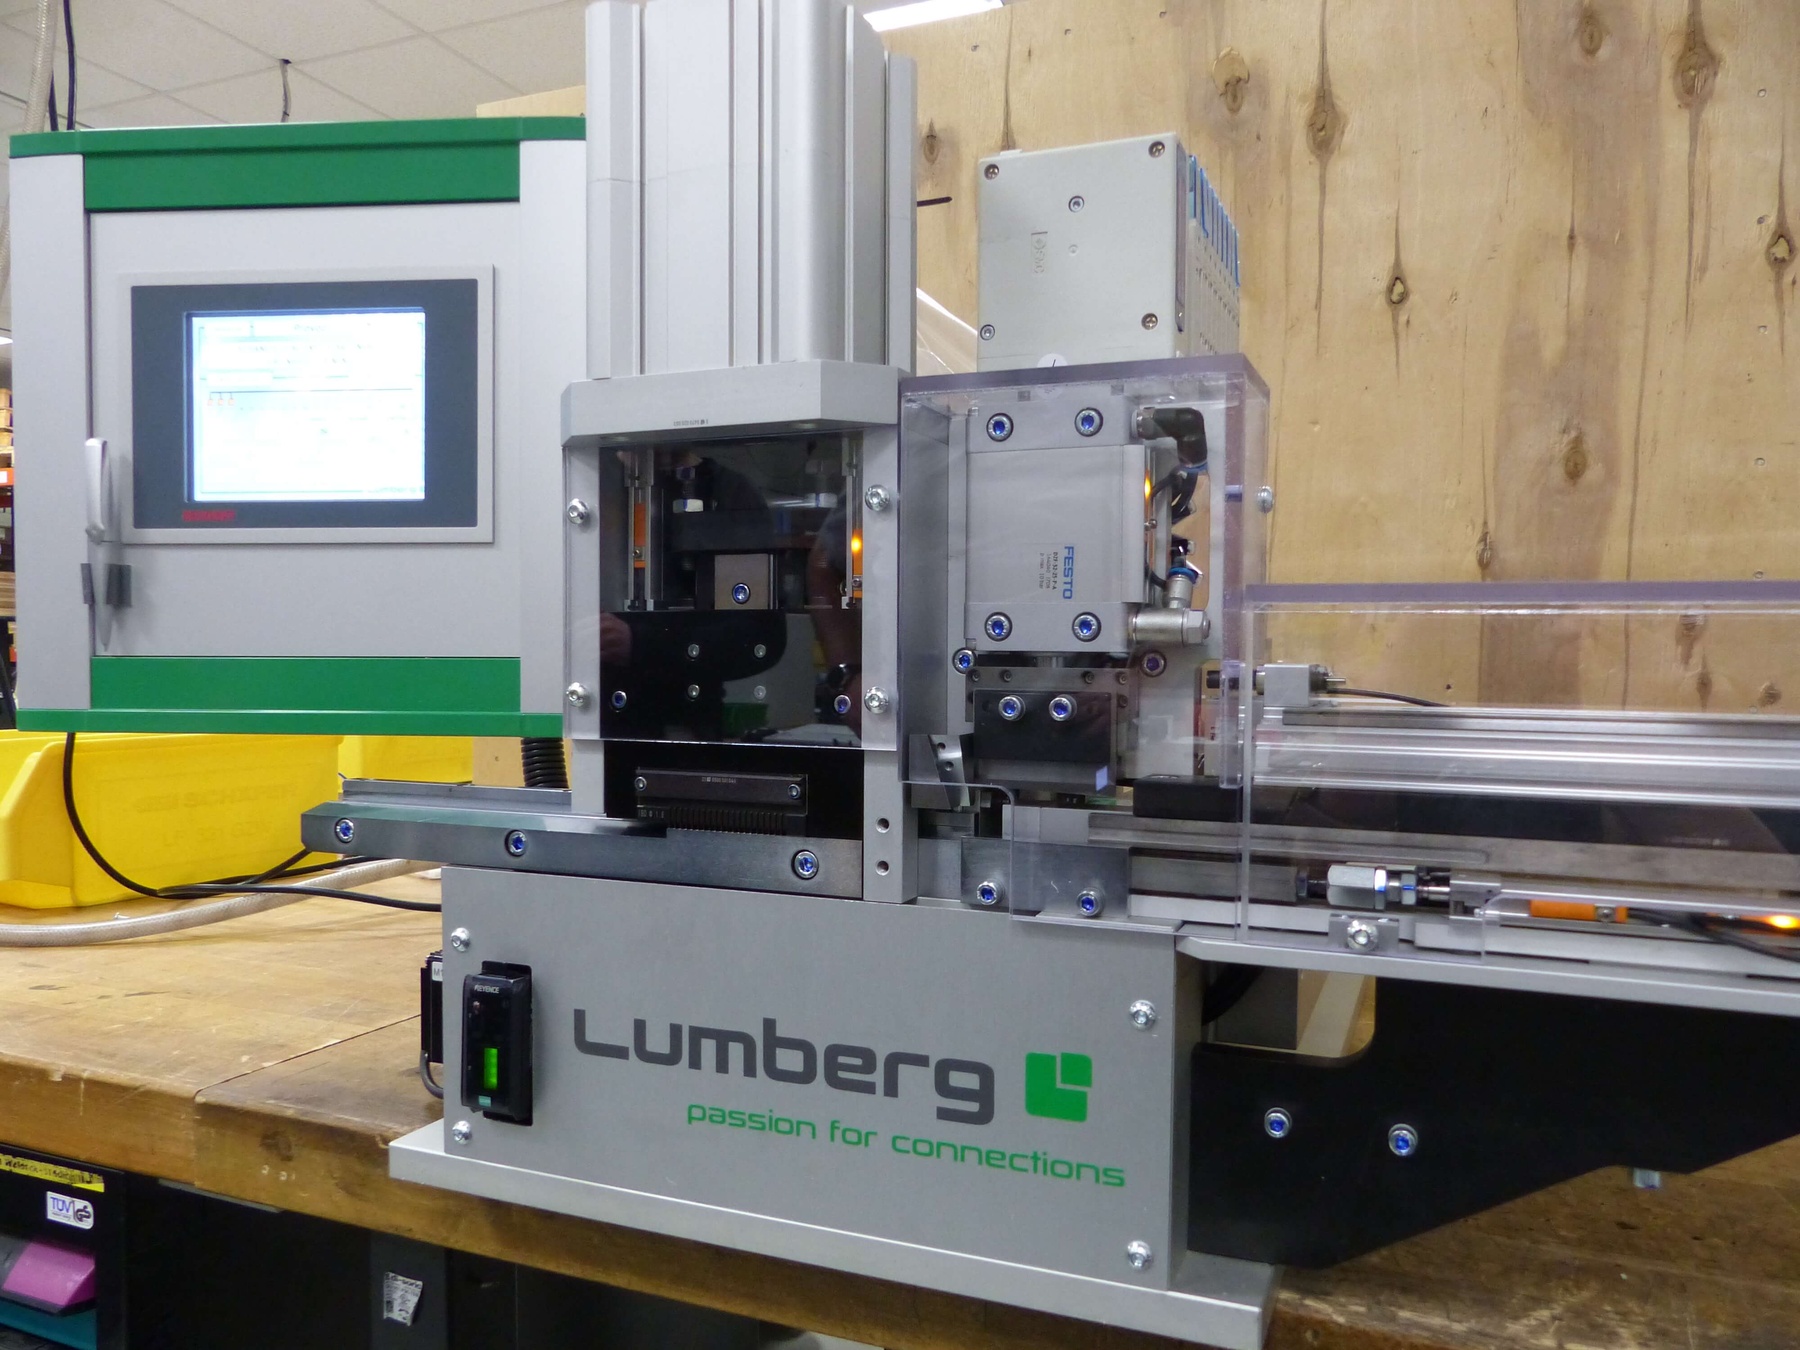 Semi-automatic machines developed by Lumberg equipped with the CC-4000